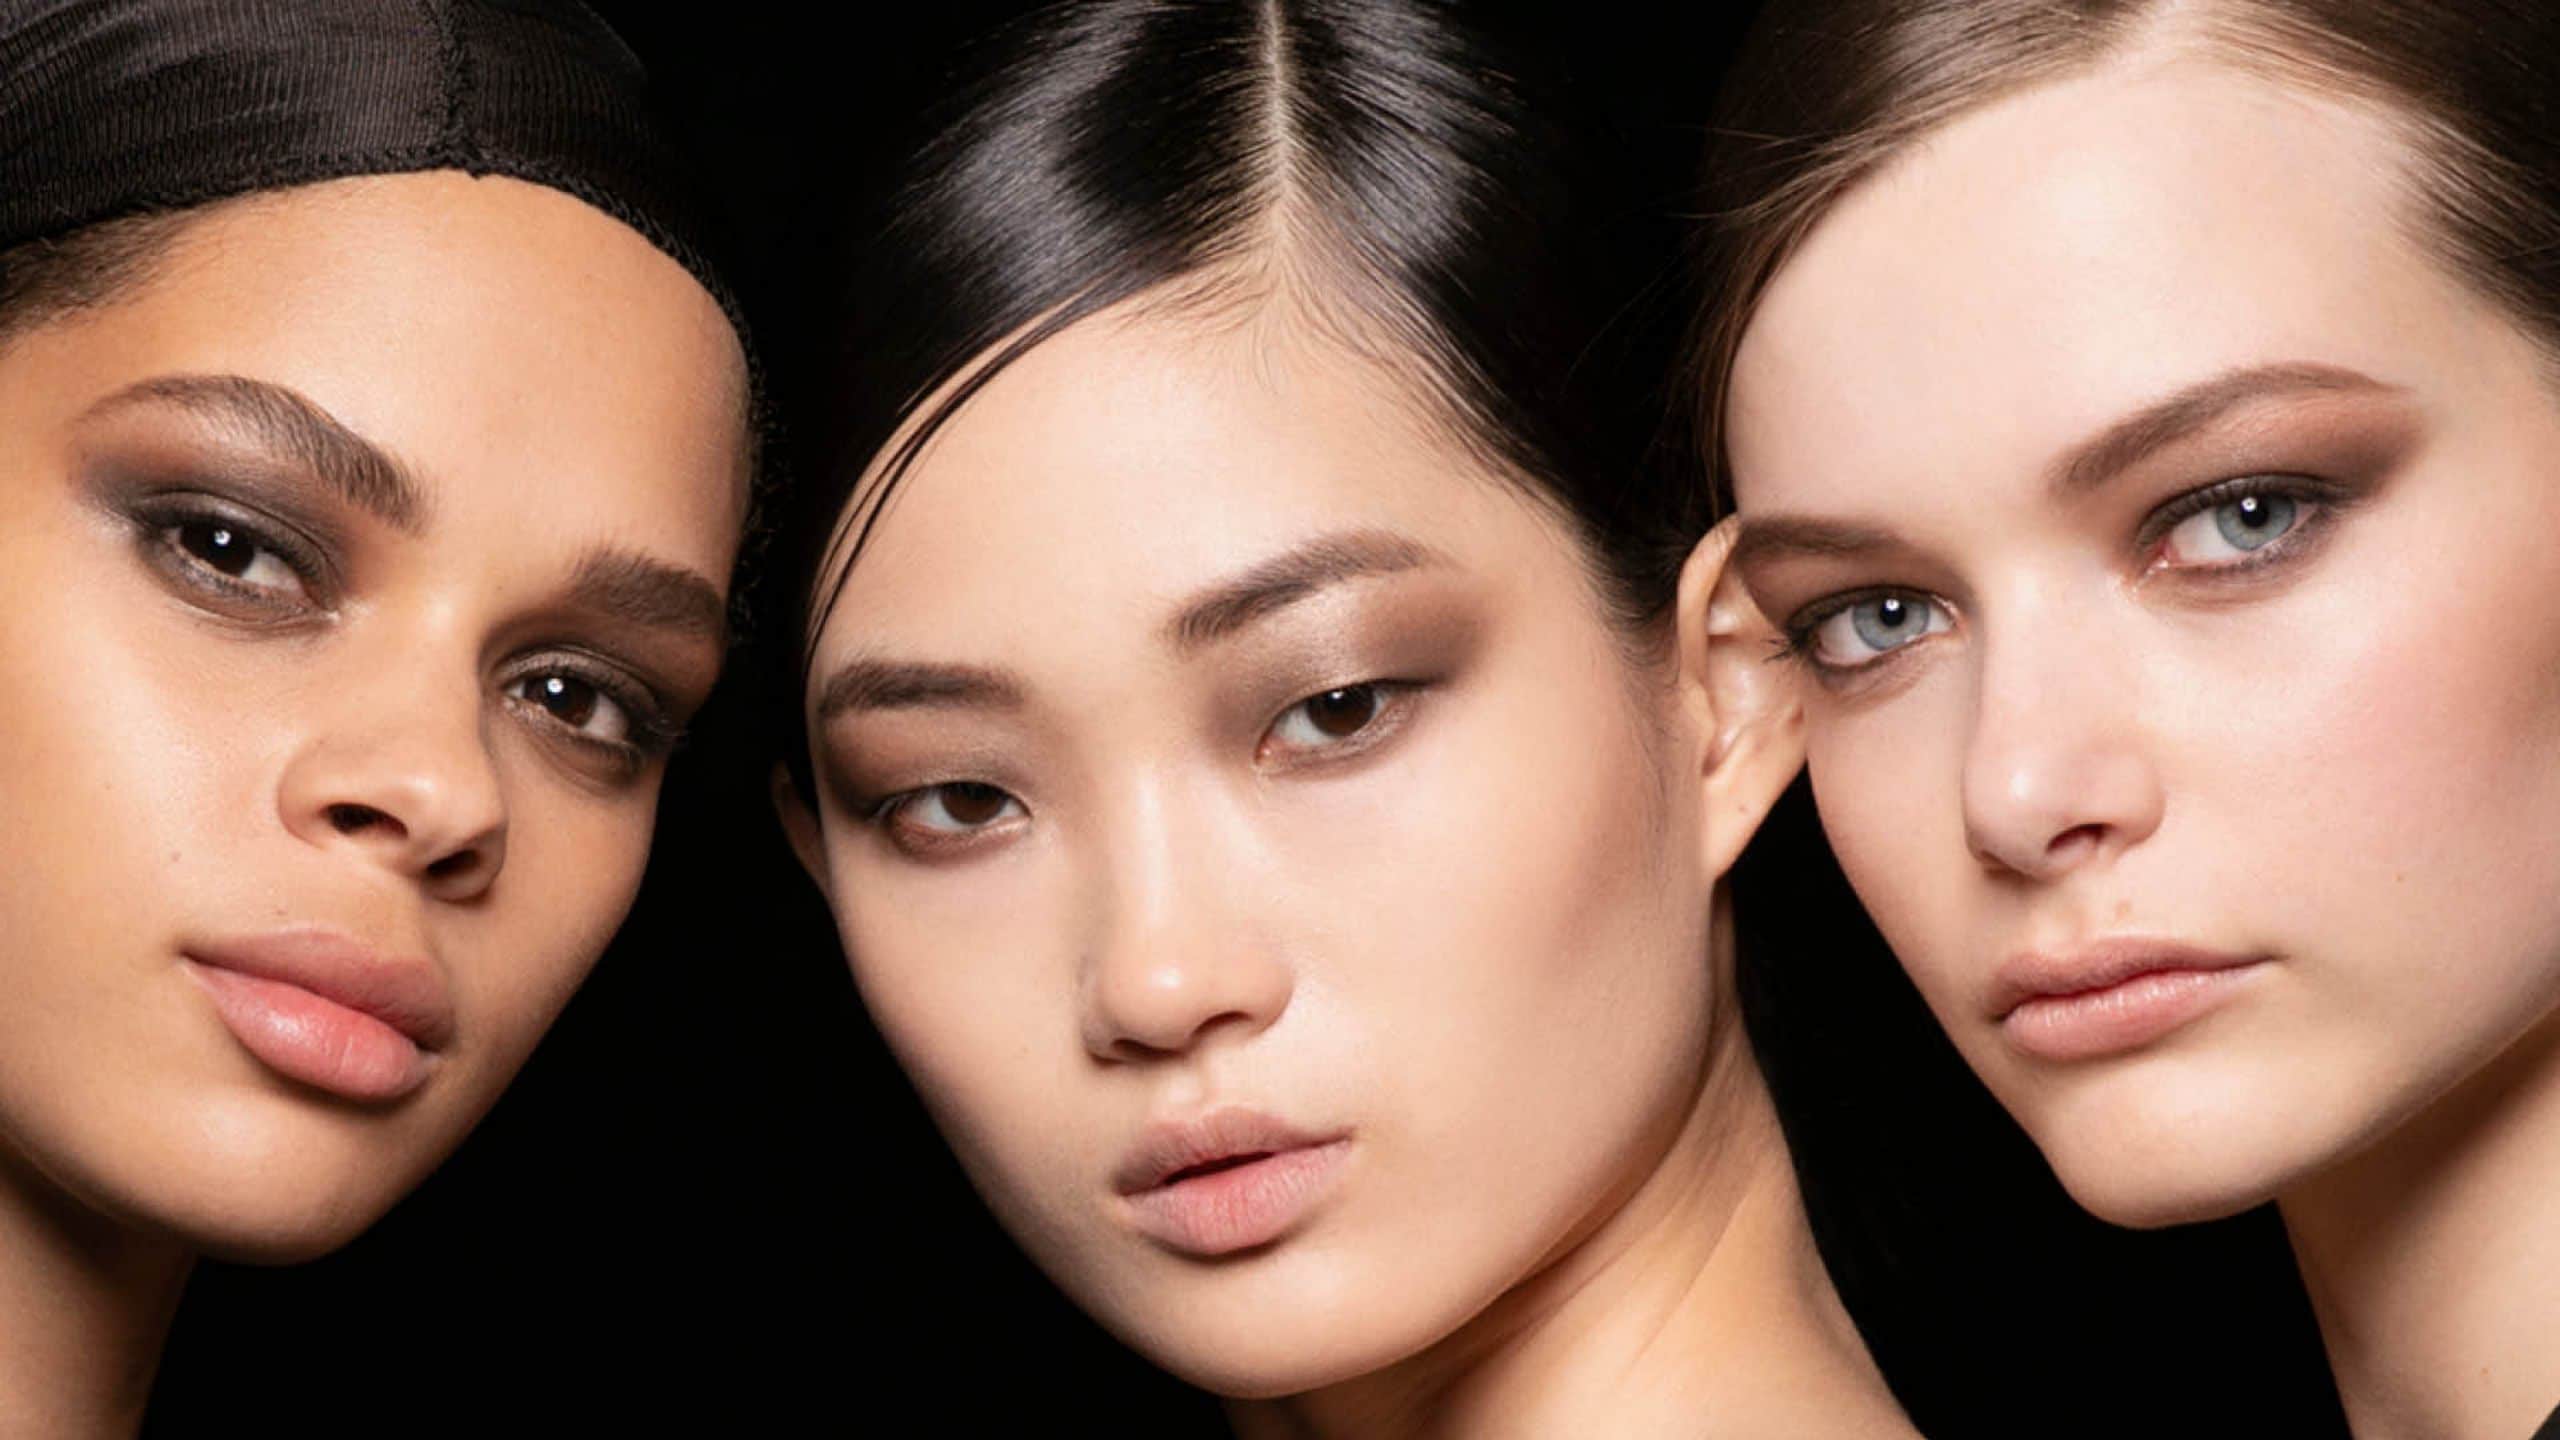 How to replicate the subtle glam makeup Tom Ford's AW19 runway